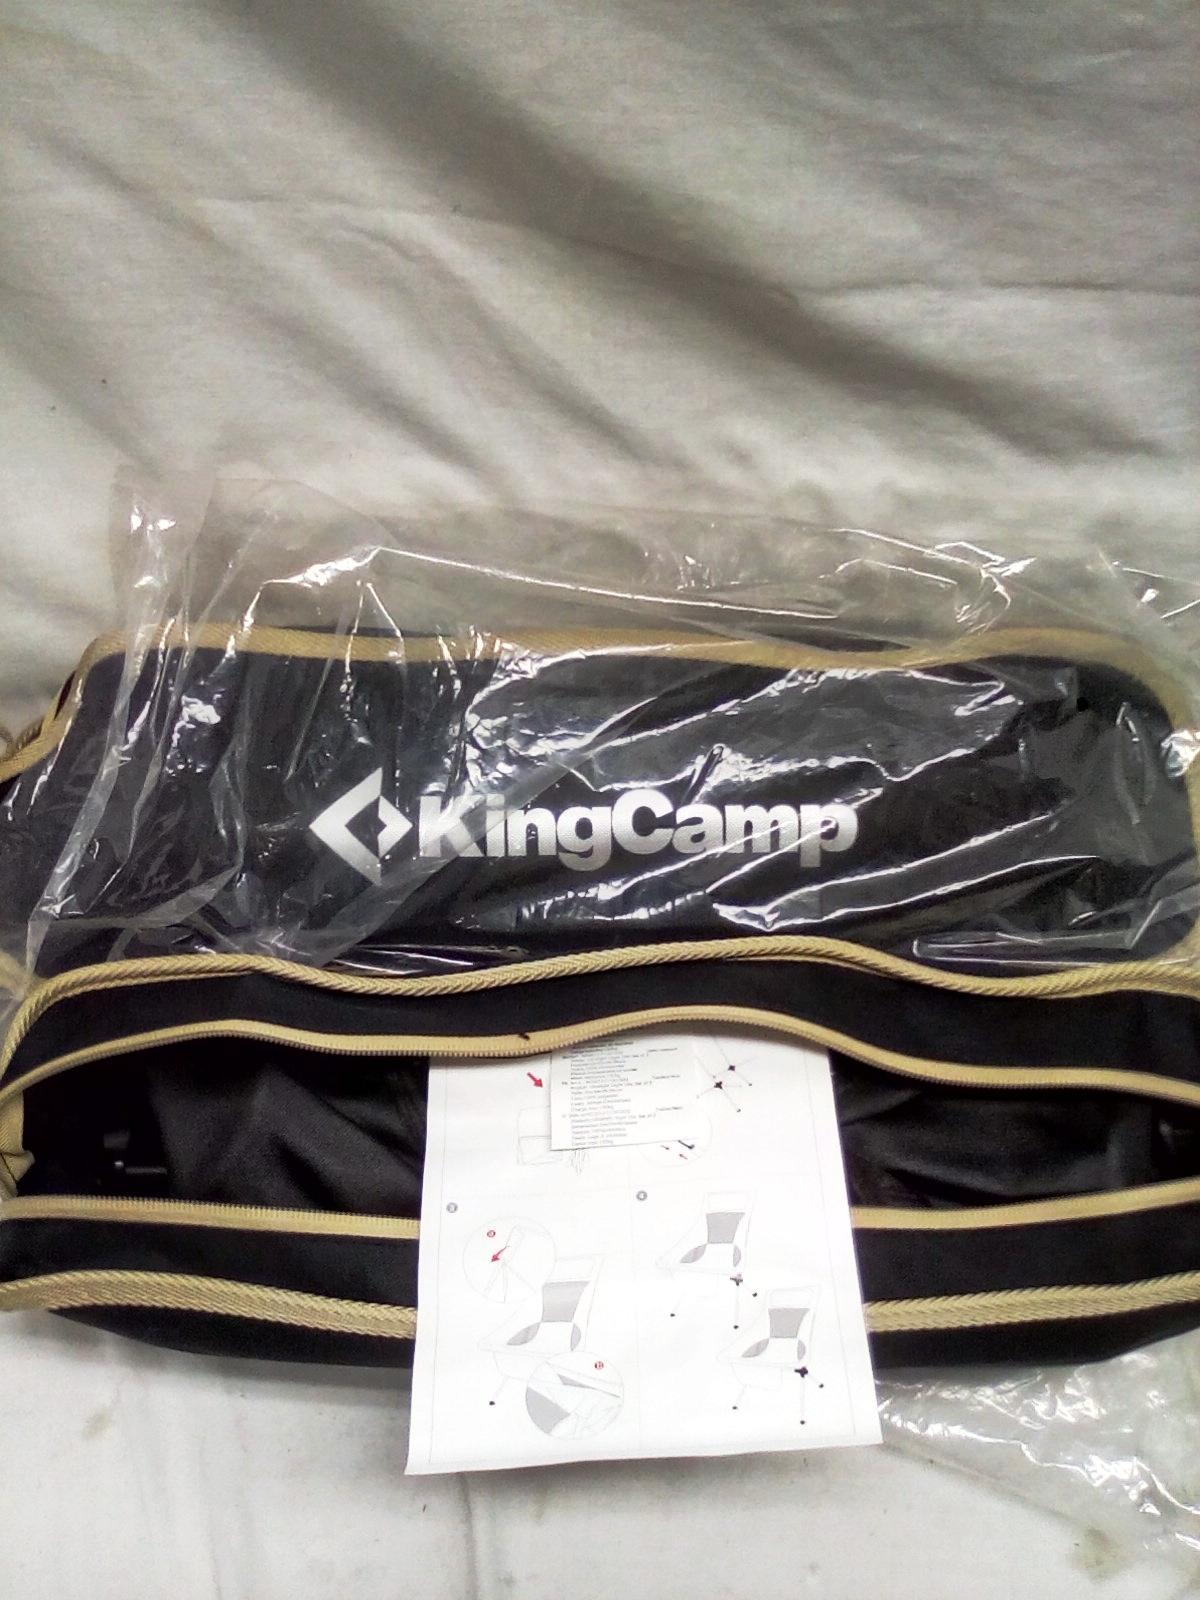 KingCamp Qty; 2 Ultralight Hight Chairs W/ Carry Bags